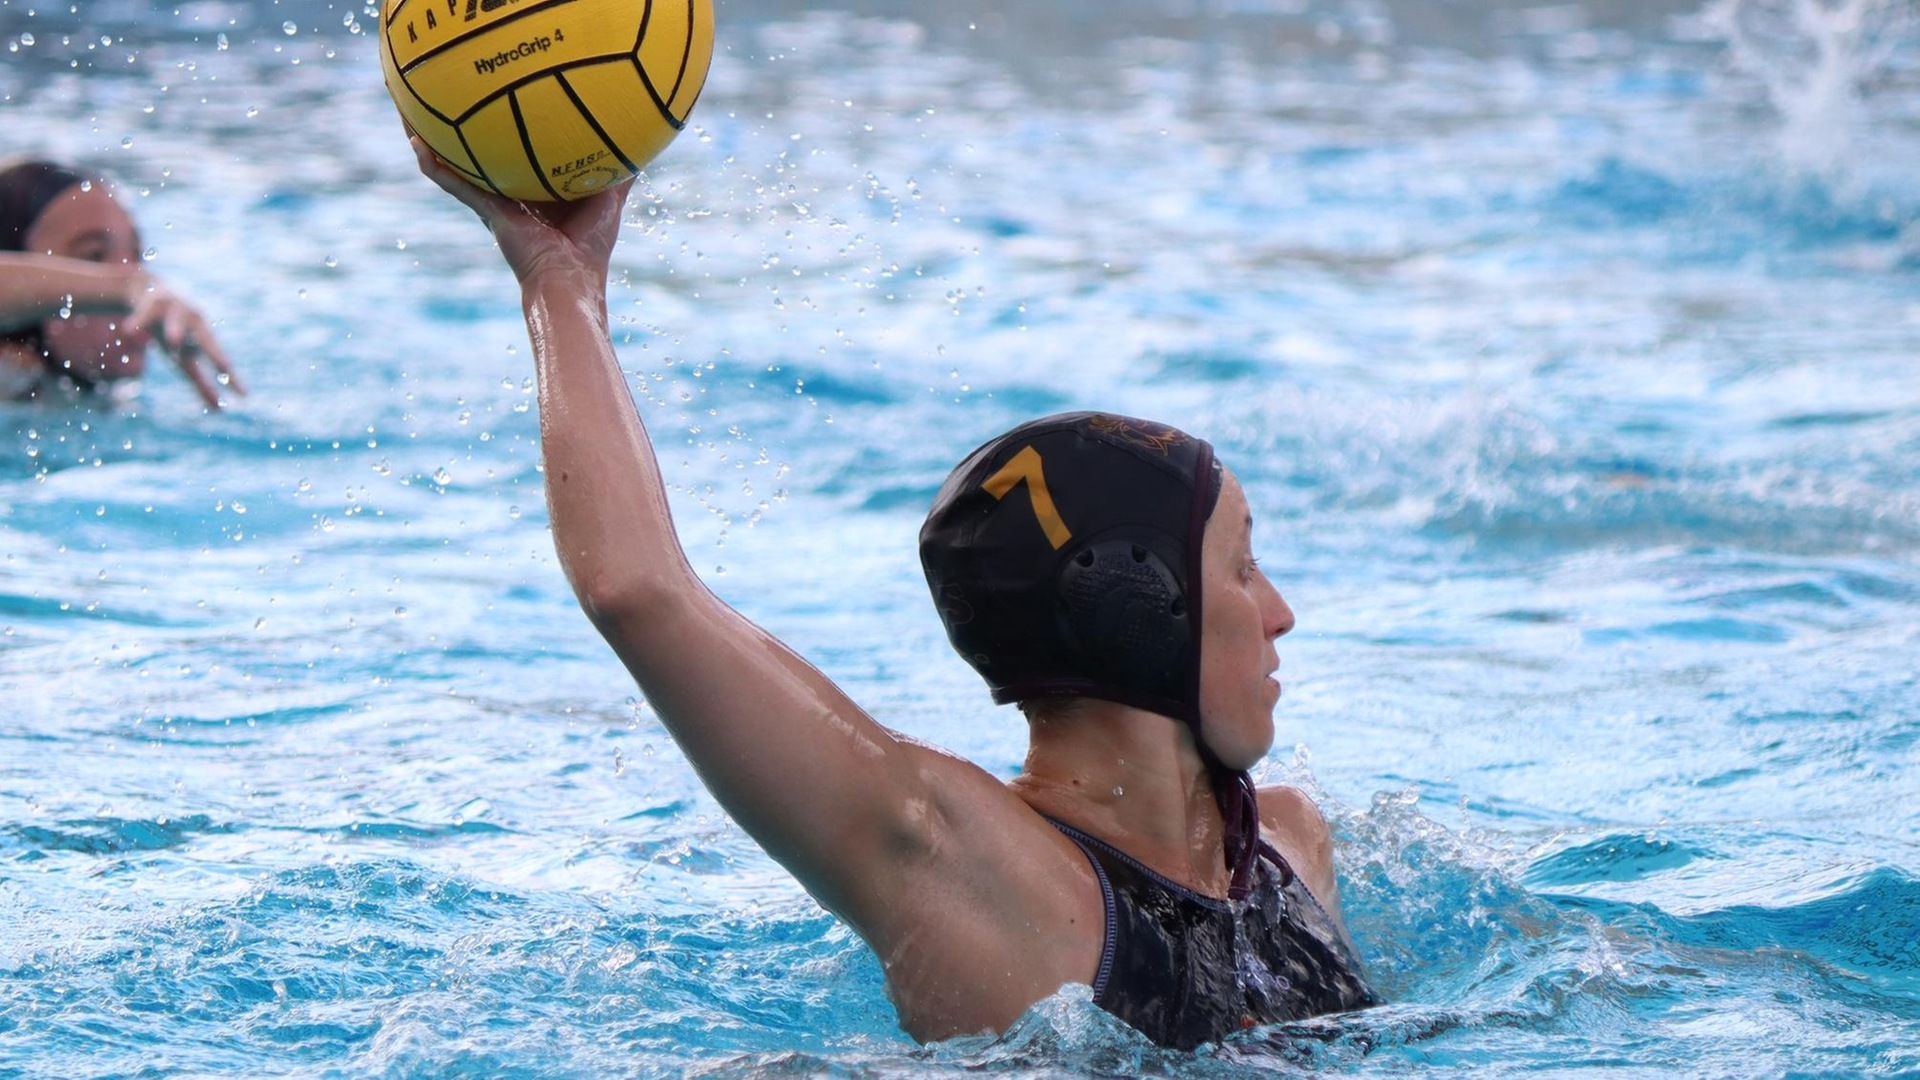 Jessi Beyer was one of 8 Athenas to earn the highest academic honor from the ACWPC